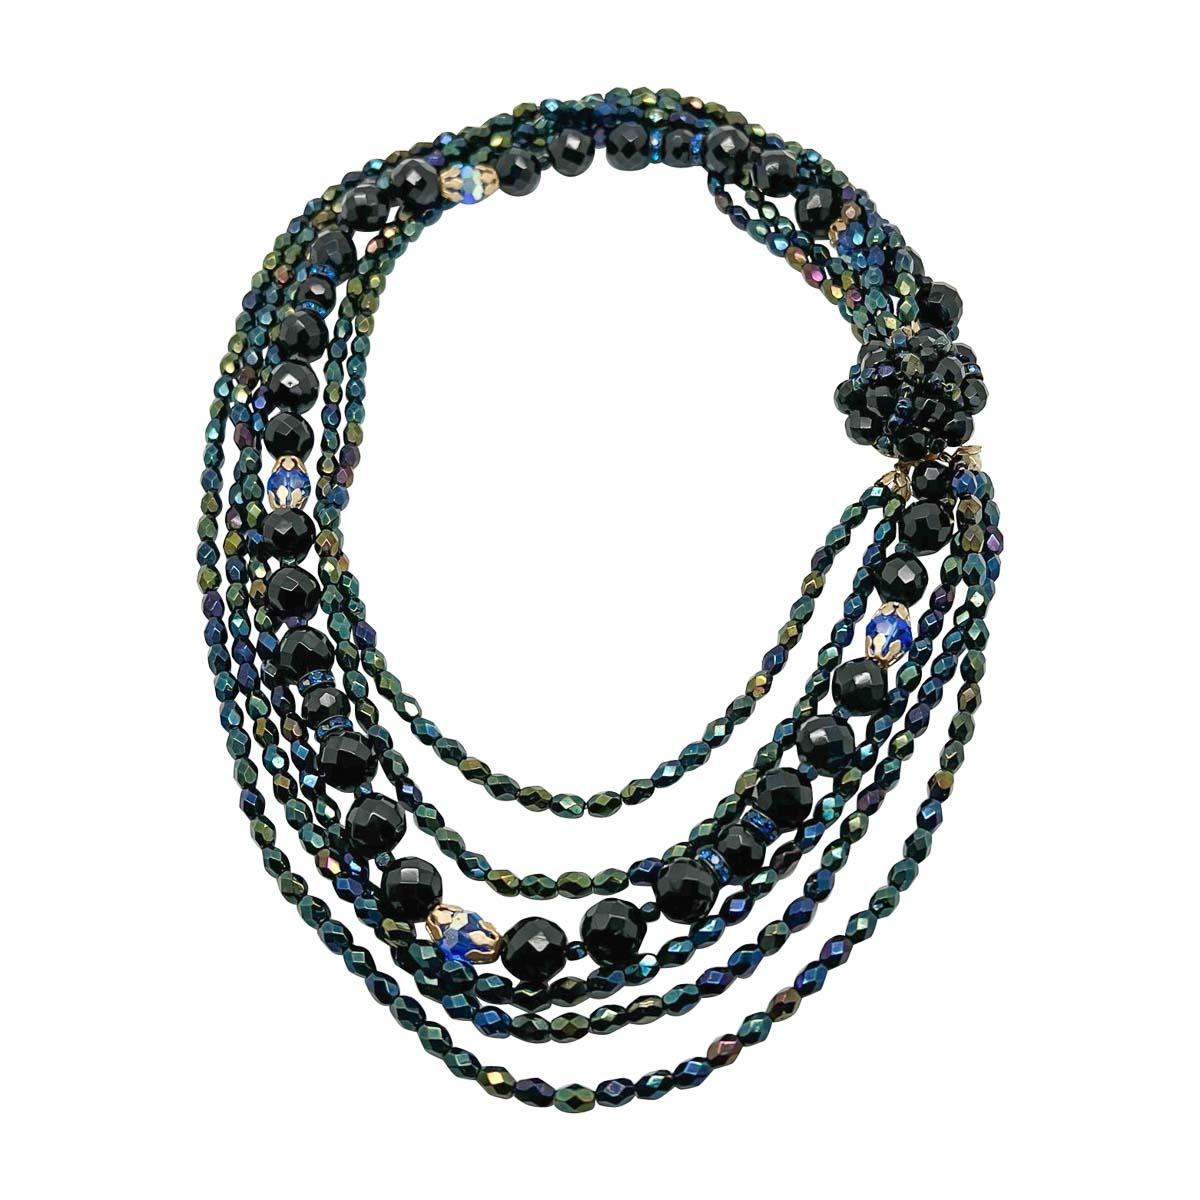 A sumptuous vintage midnight torsade from the 1950s. Comprising a dramatic array of black and midnight blue shades for impact. Intricate detail belies the grand scale. Amplify your style with this stunning work of wearable art.

Vintage Condition: